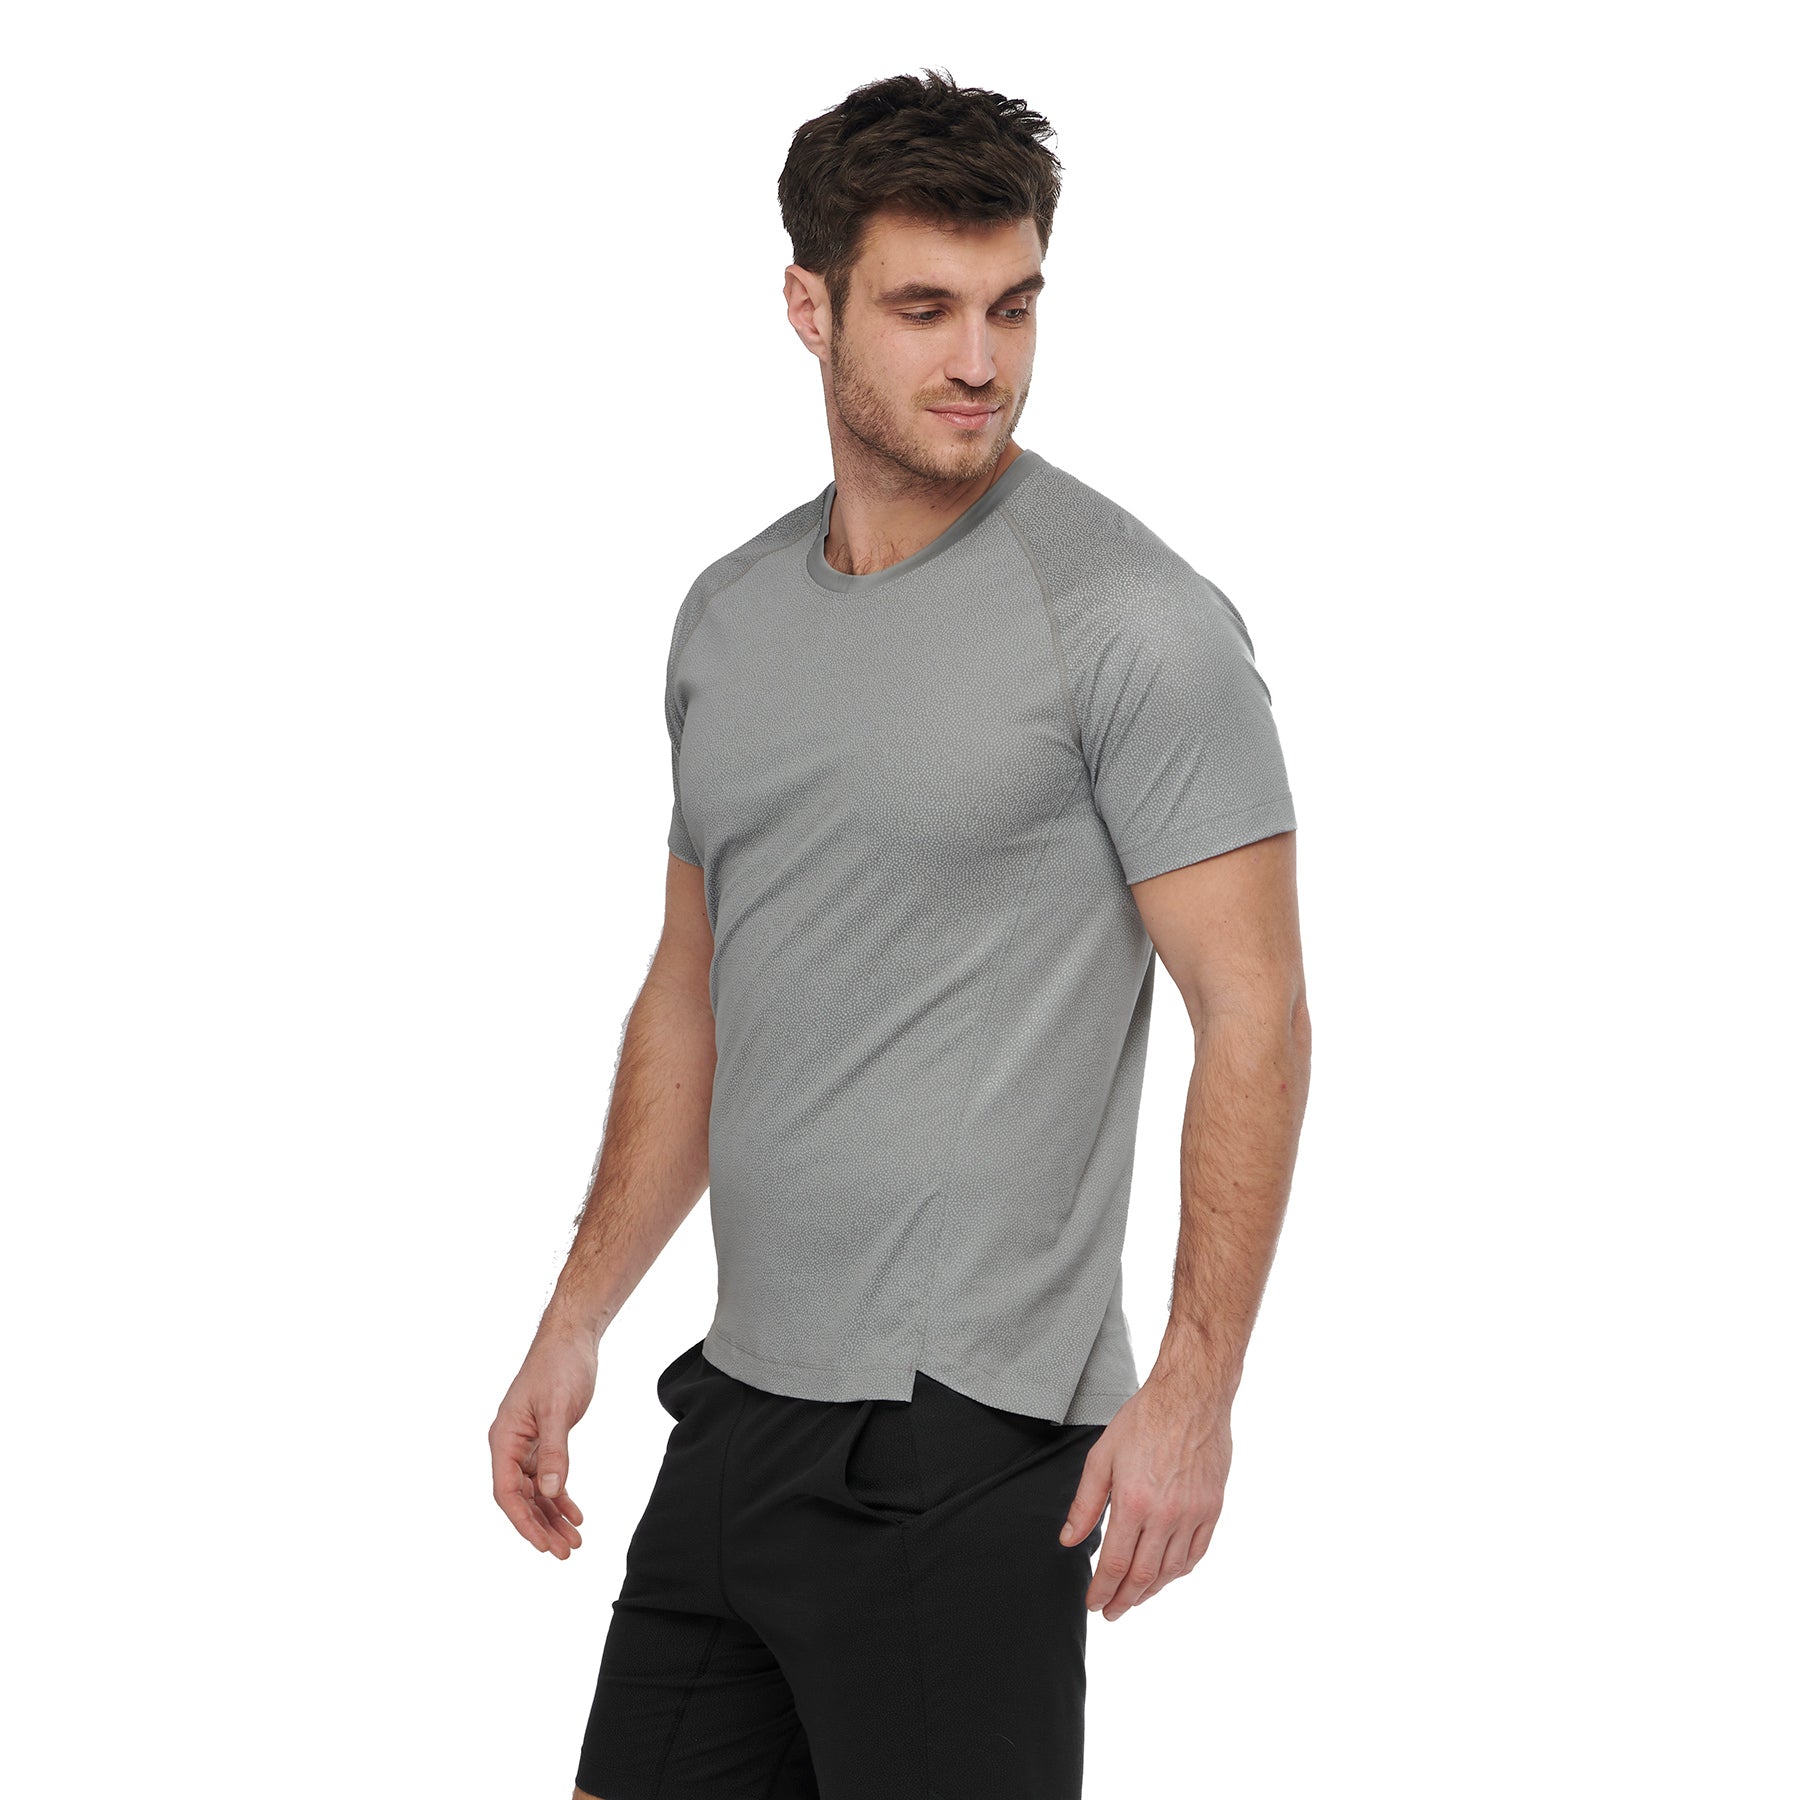 Muscle recovery black sleep t-shirt men || Silver